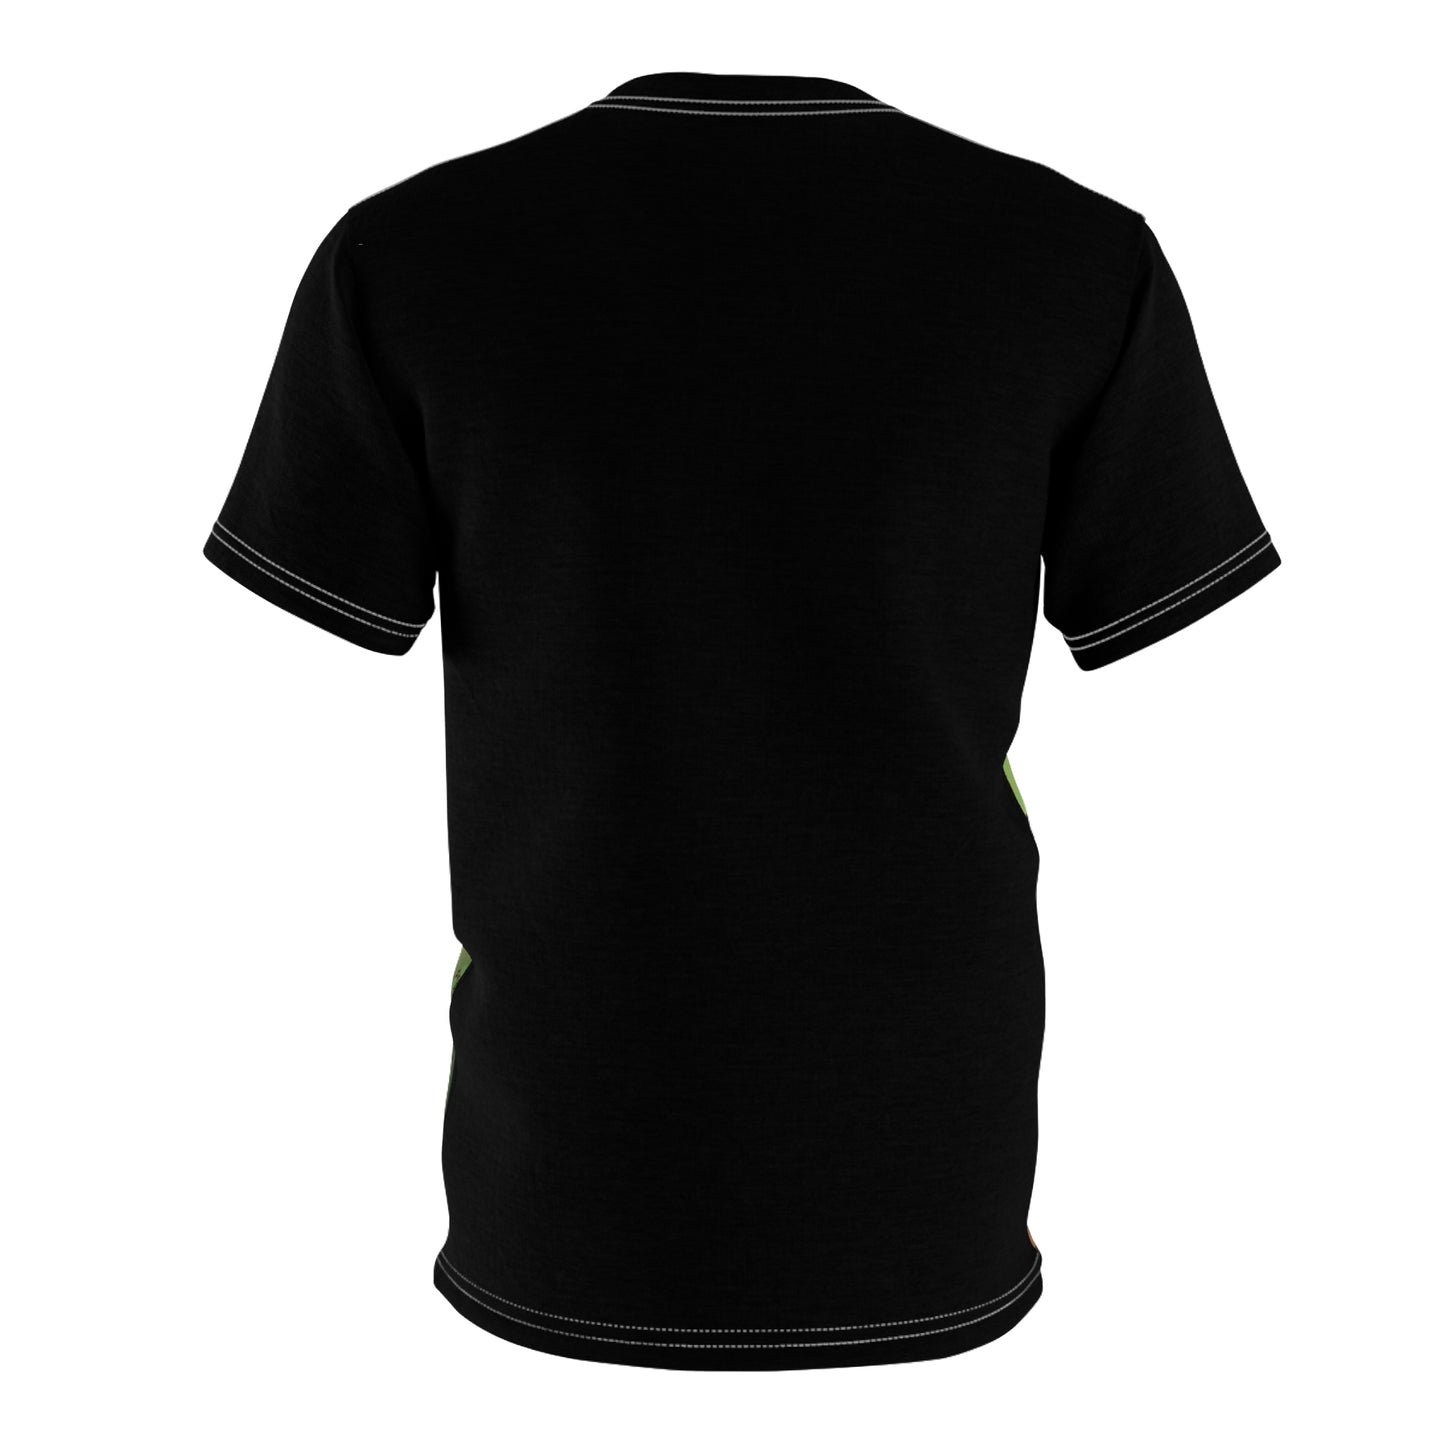 Blackwing - Unisex All-Over Print Cut & Sew T-Shirt